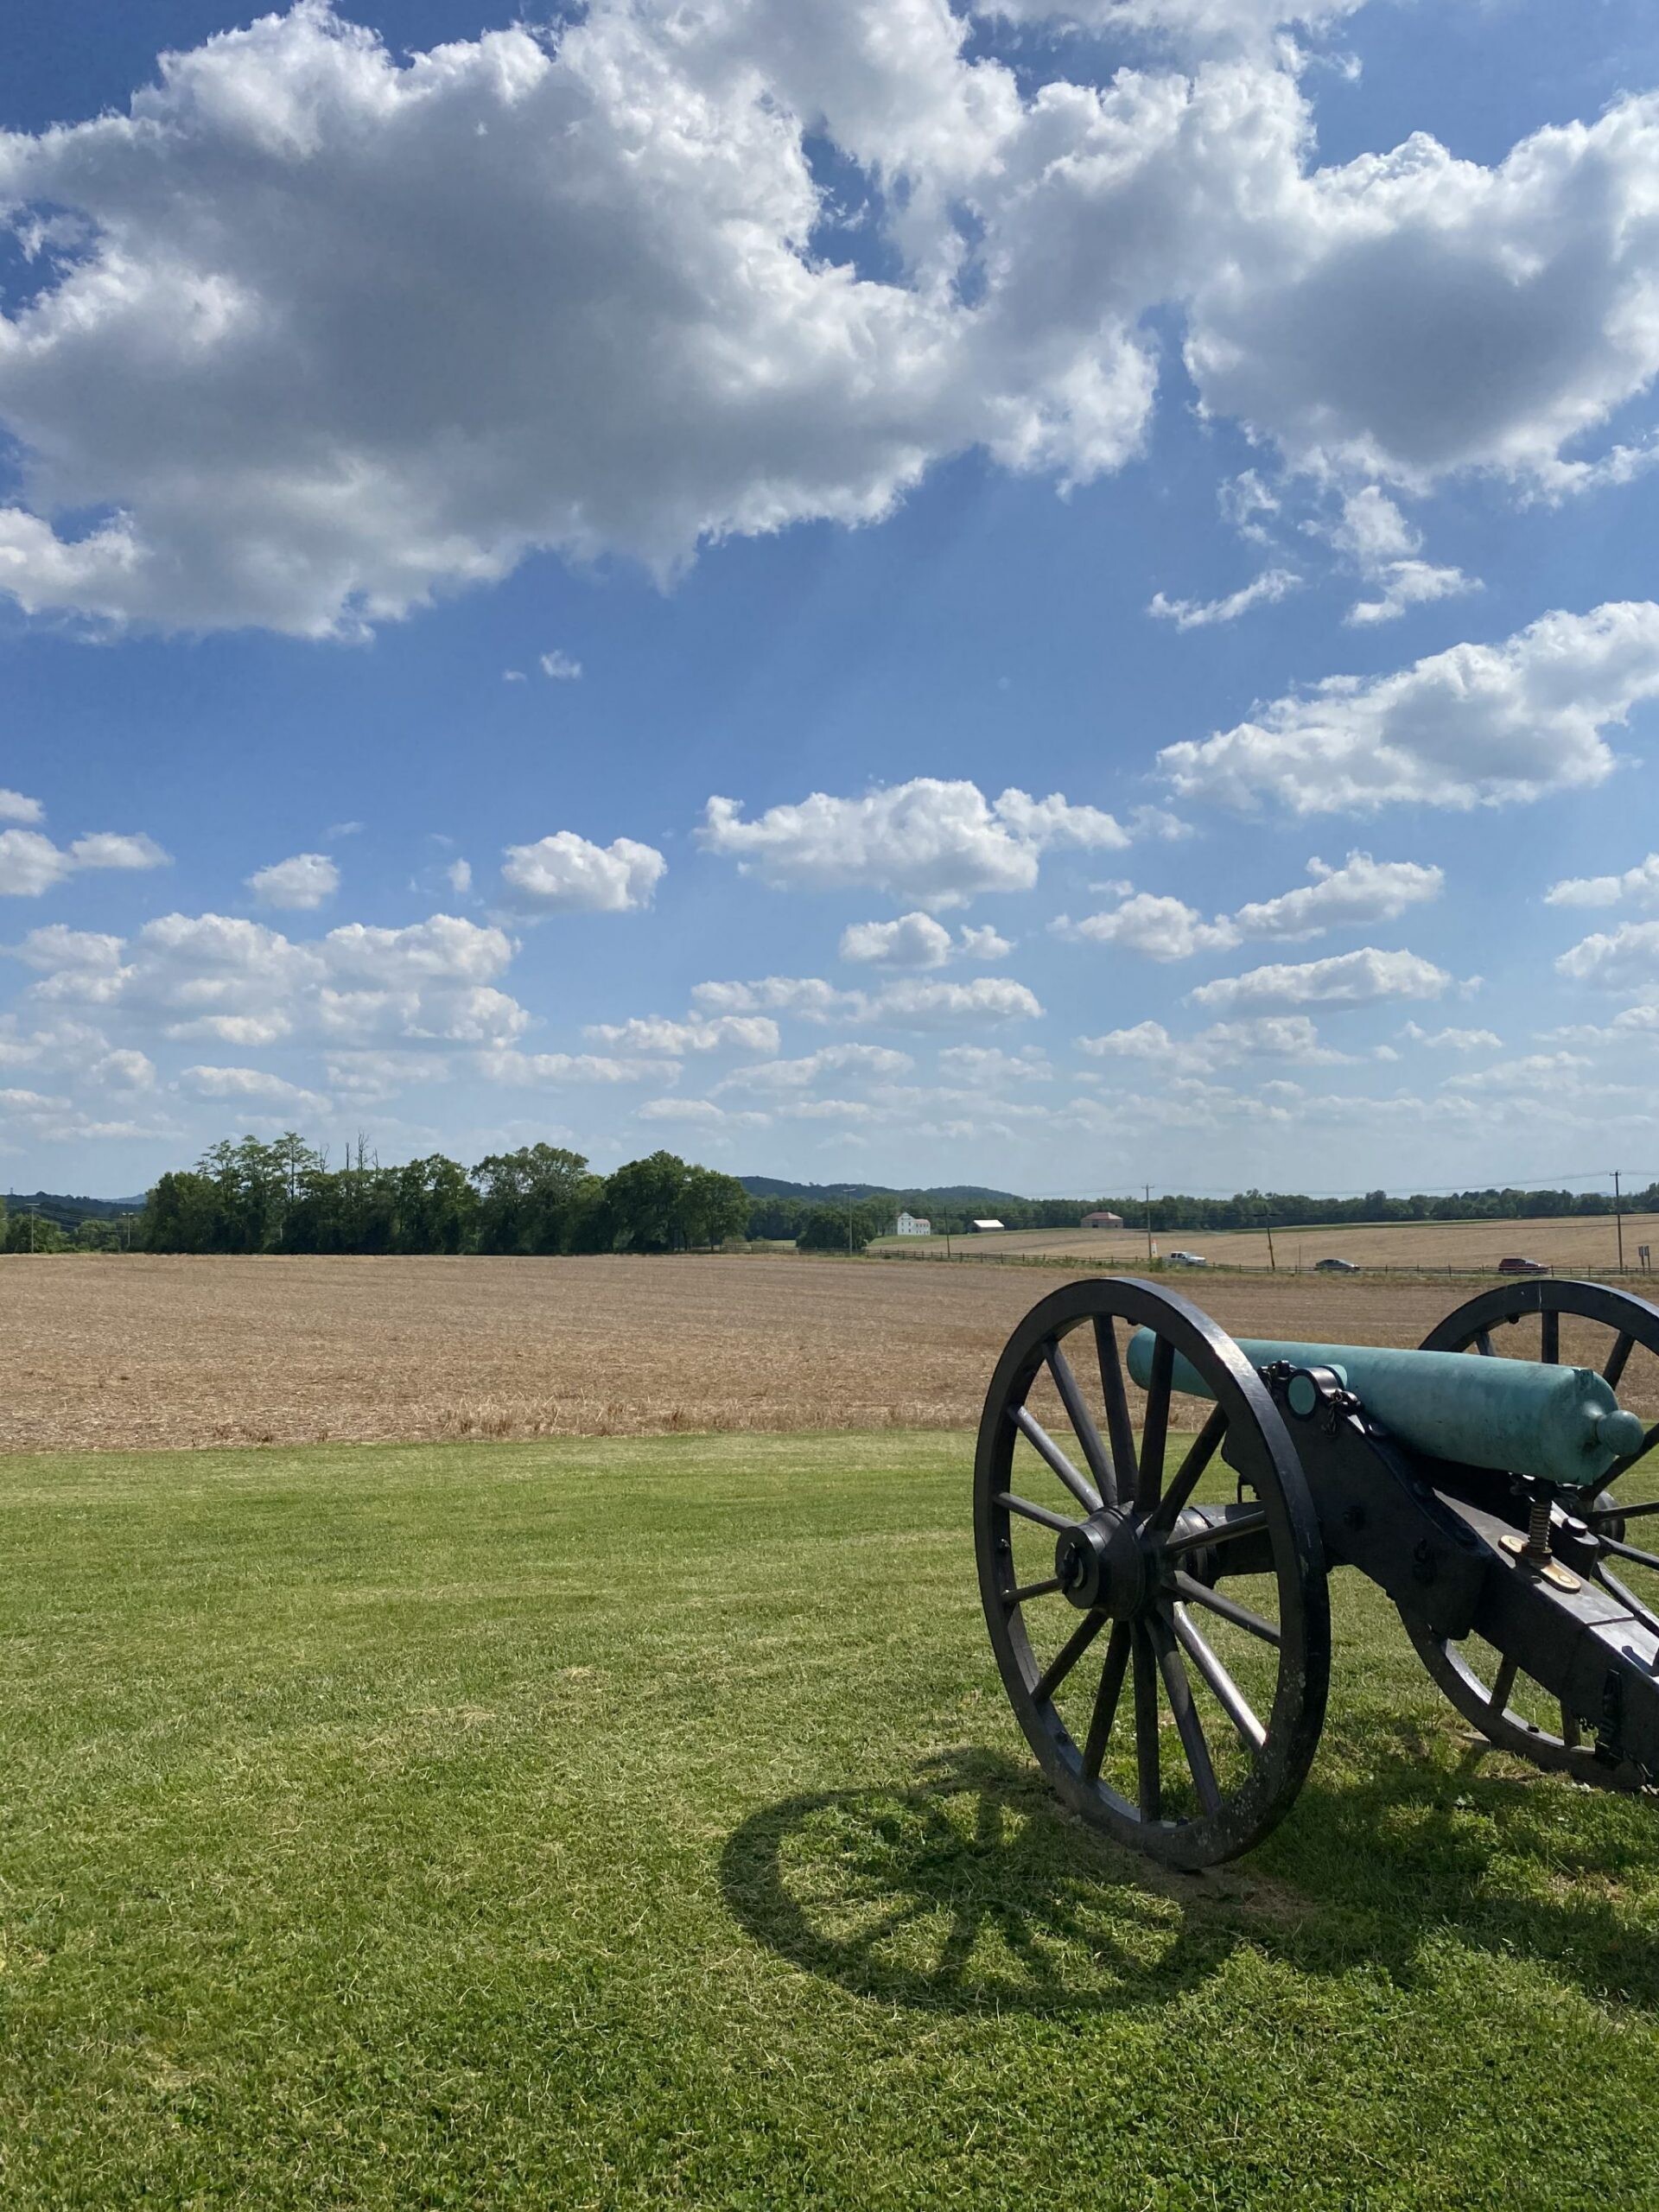 Gettysburg: Monocacy National Battlefield, Southeast of the city of Frederick, Maryland, The battle that saved Washington. 1920x2560 HD Wallpaper.